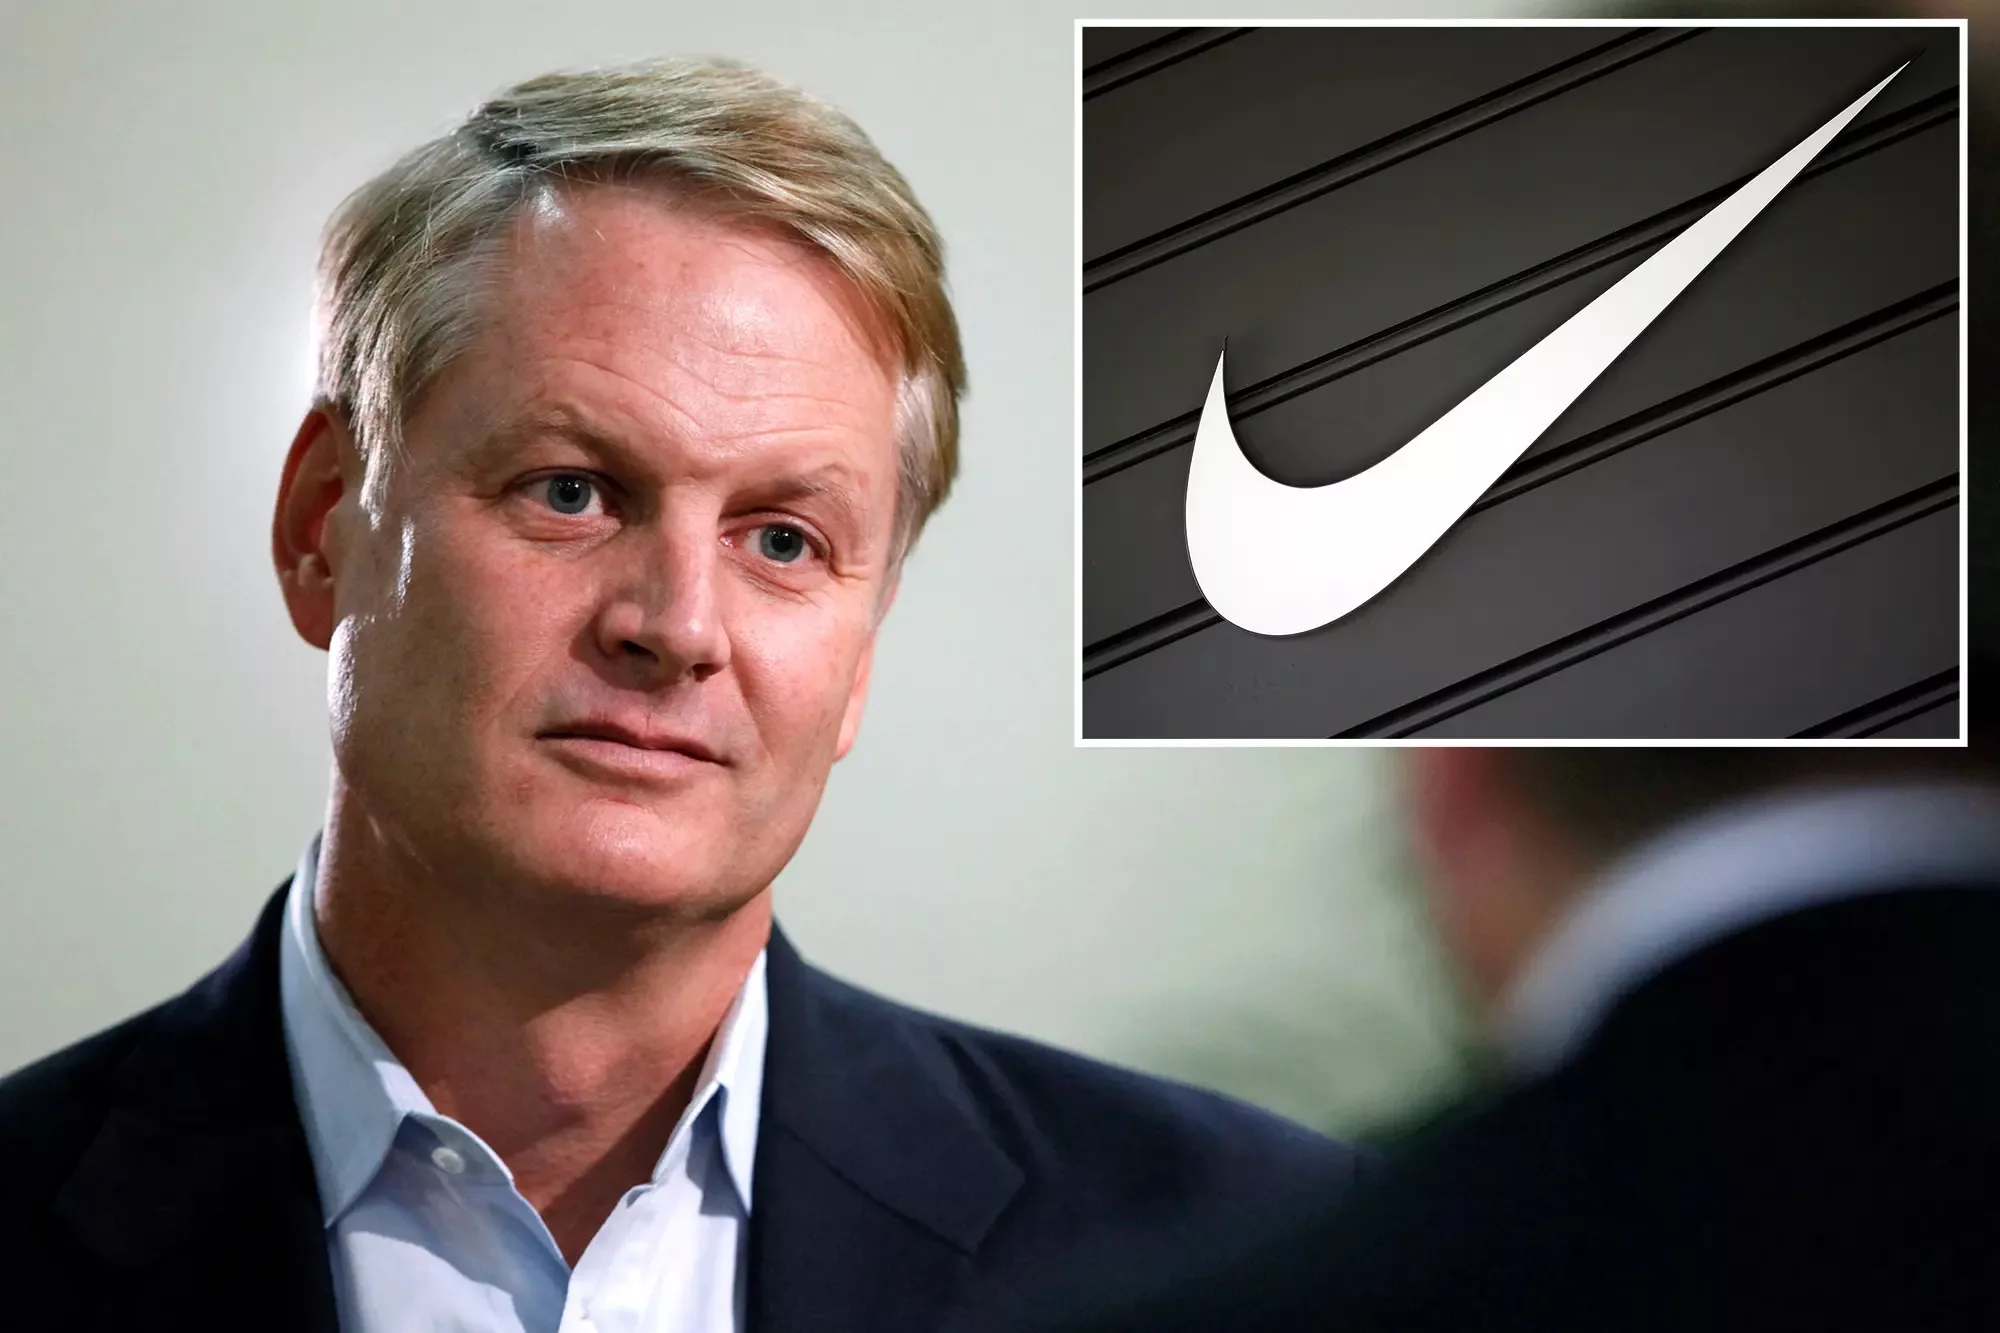 Nike finds new strategy through Gen Z consumers in China